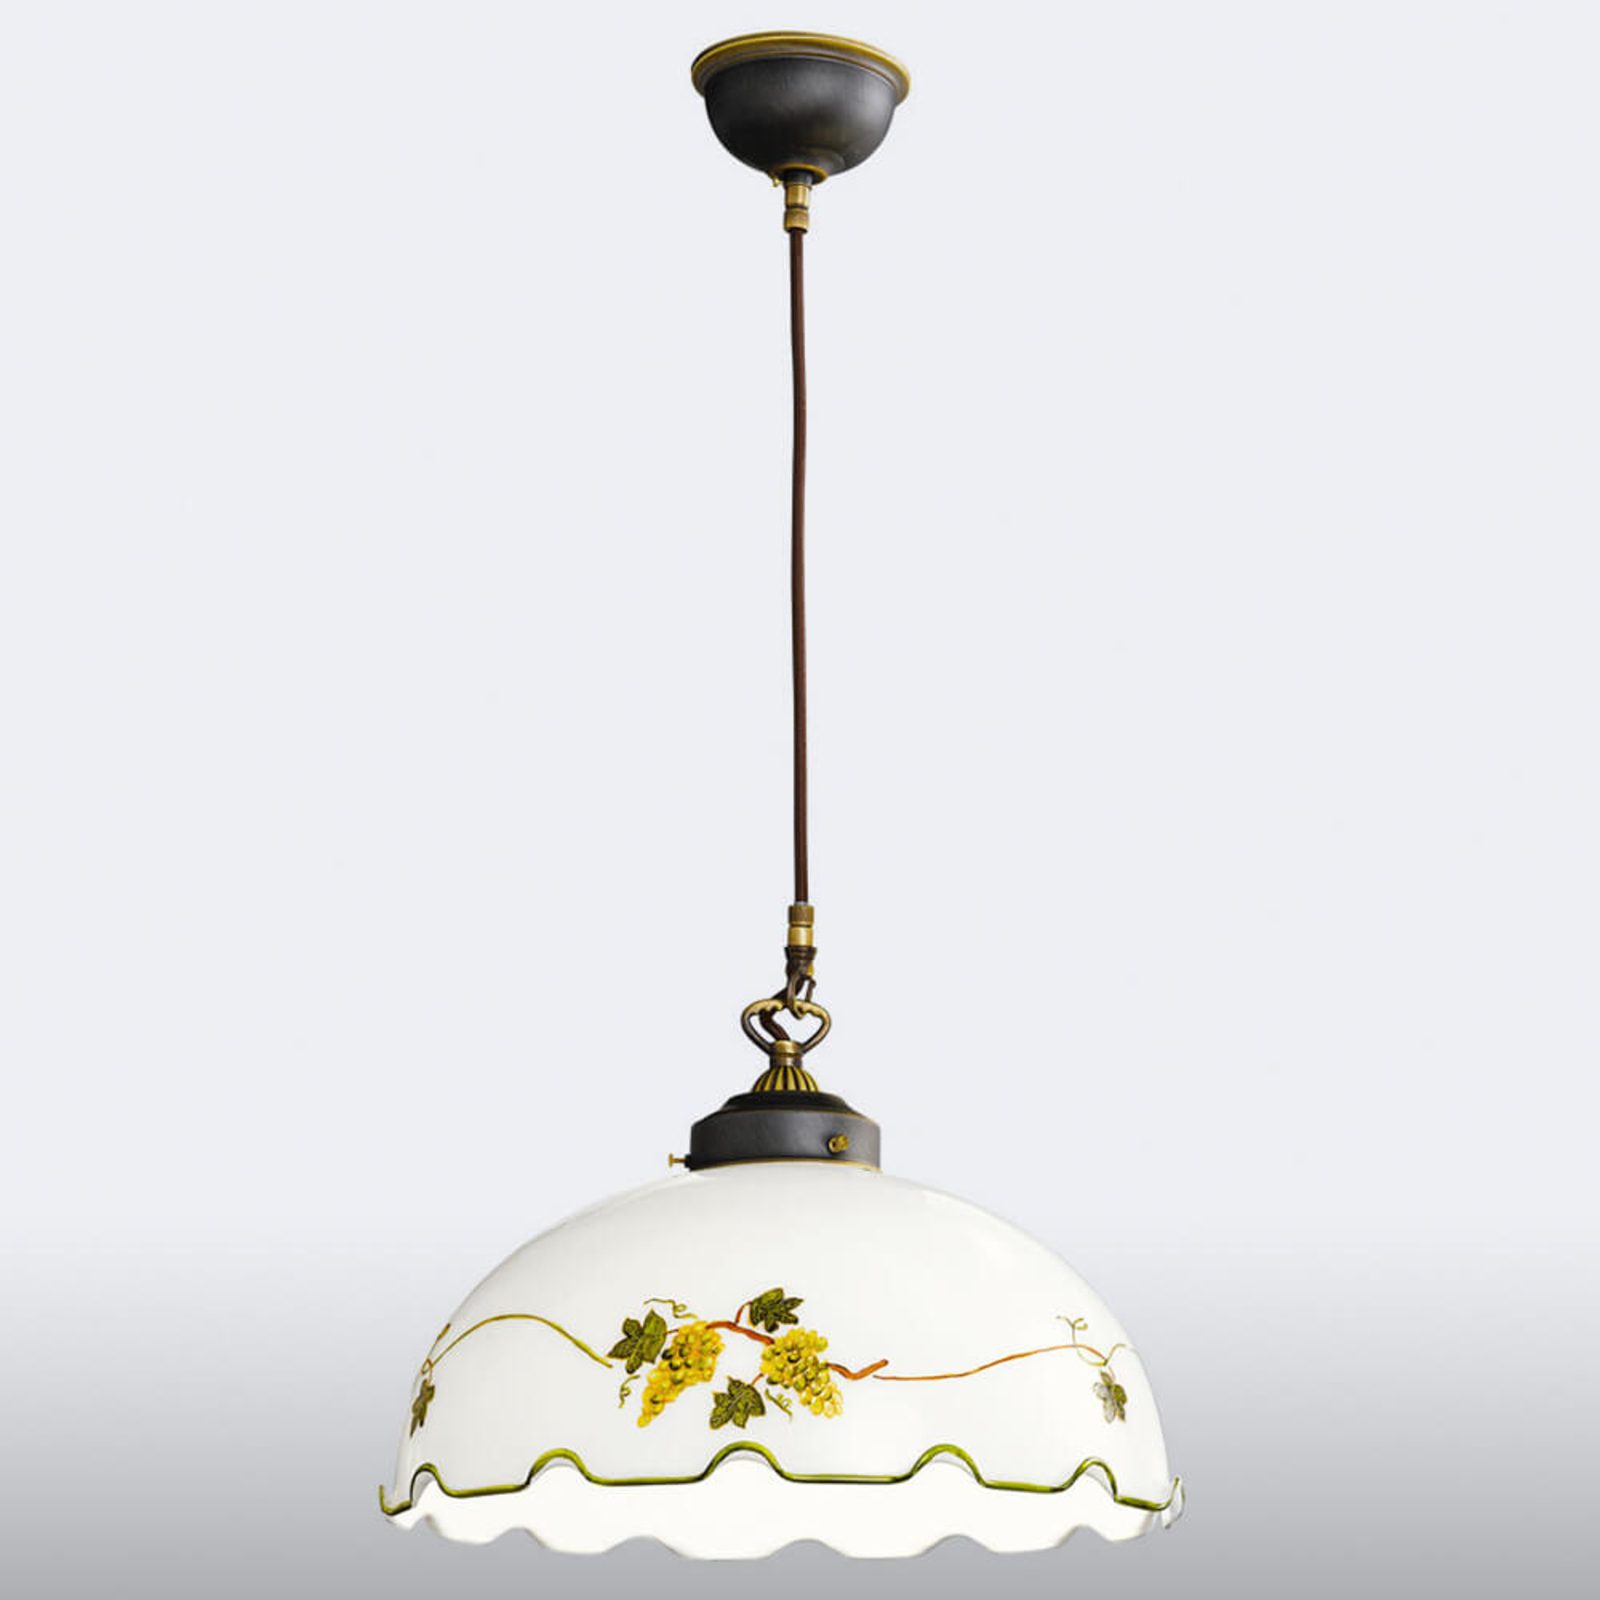 Nonna hanging light with grape motif, hand painted